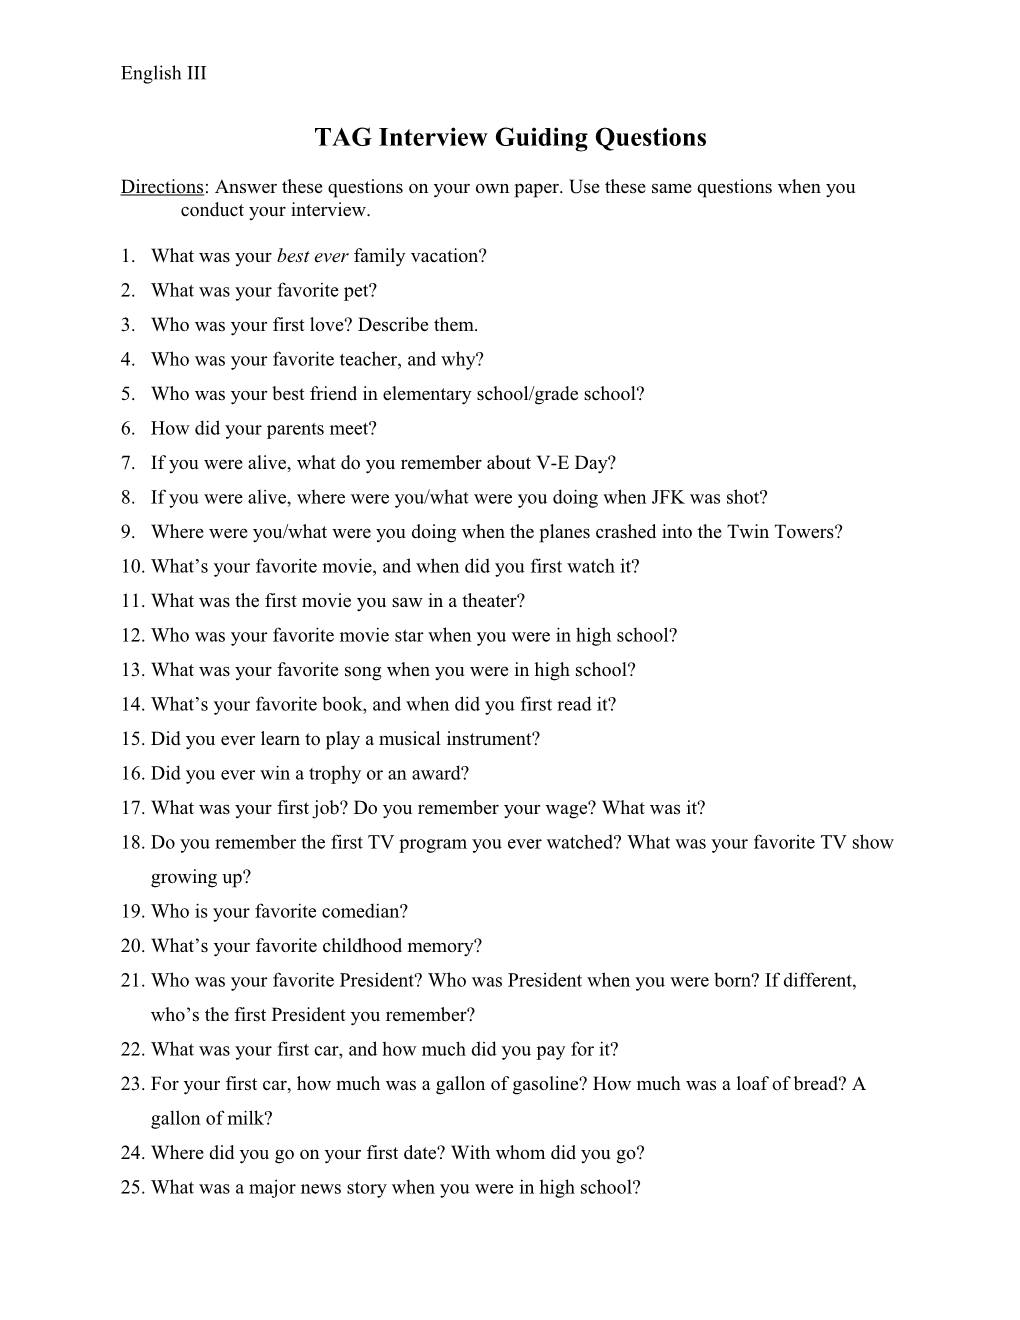 Interview Guiding Questions